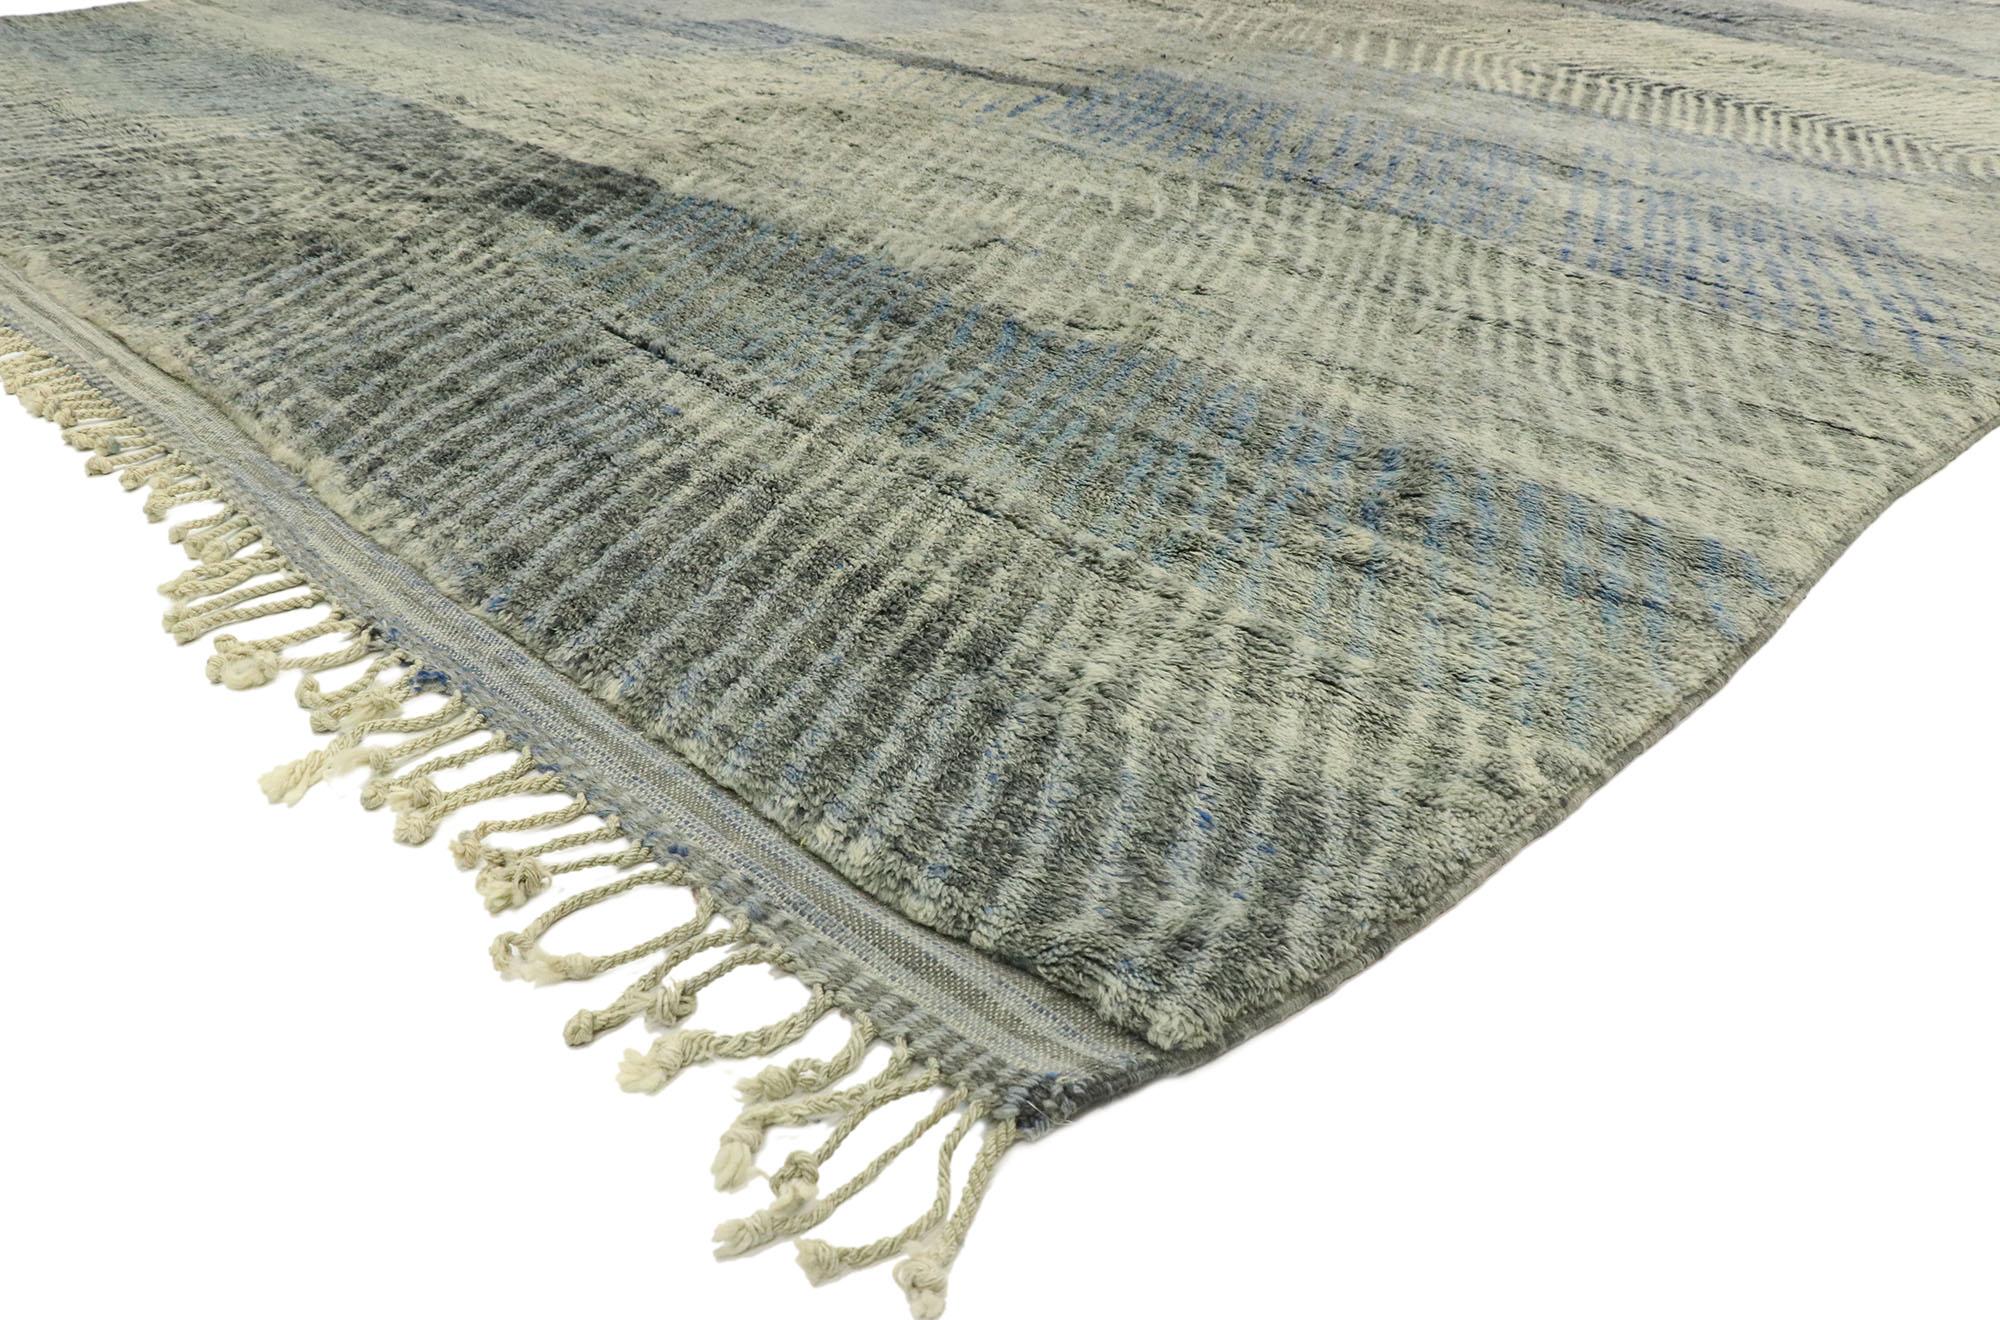 20523 New Contemporary Berber Moroccan Rug with Abstract Linear Design and Plush Pile 10'02 x 13'04. Displaying asymmetrical spontaneity and gradations of color, this hand knotted wool contemporary Berber Moroccan area rug features a linear design